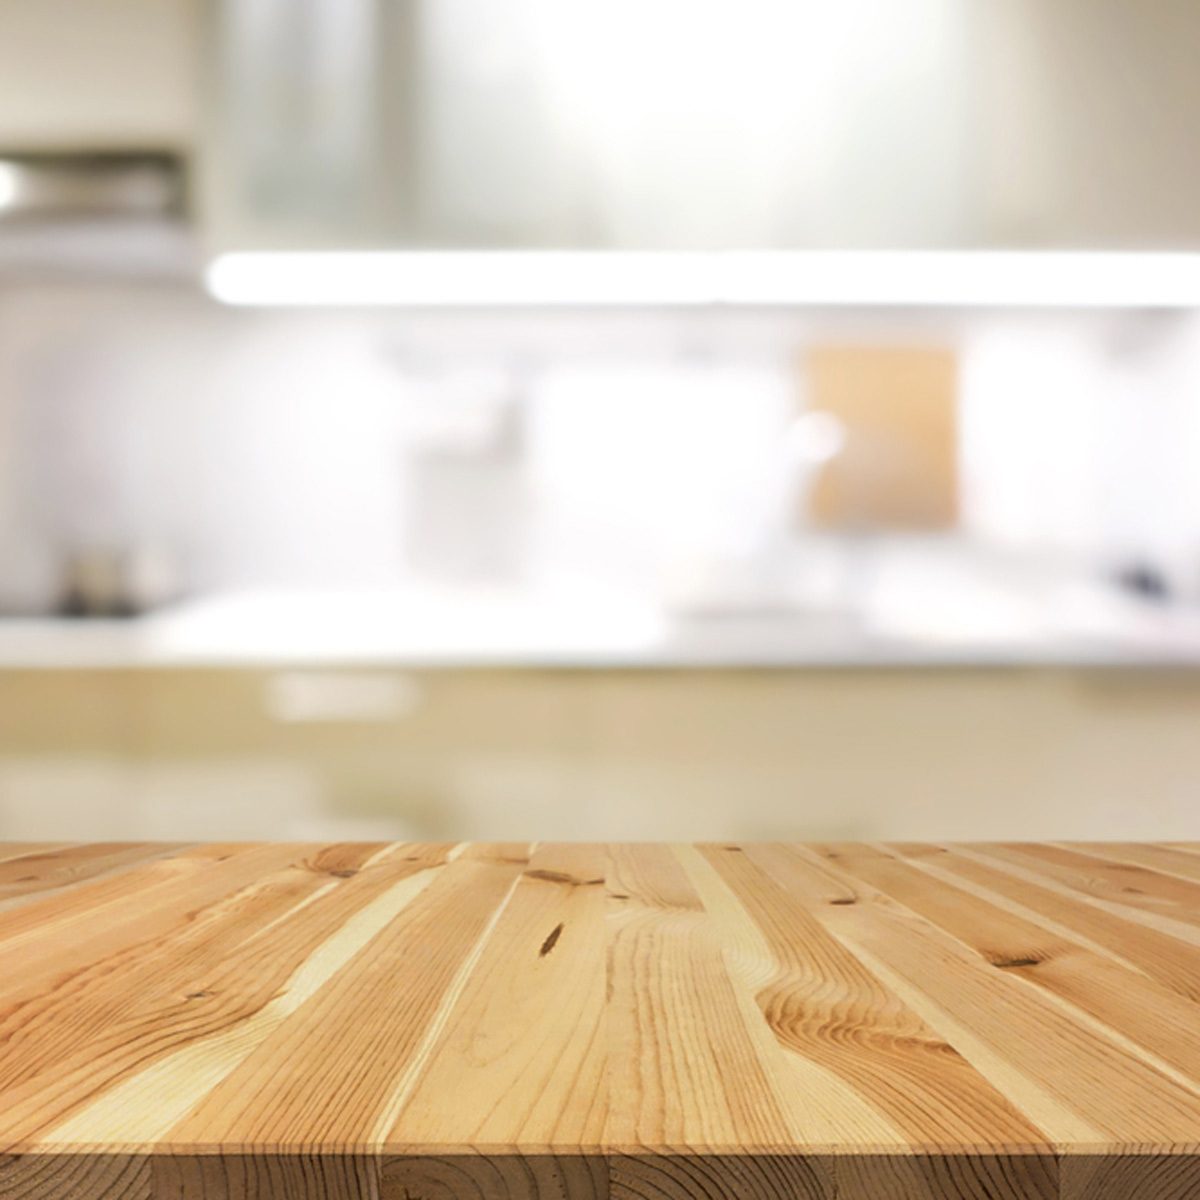 What to Know About Your Butcher Block Countertop